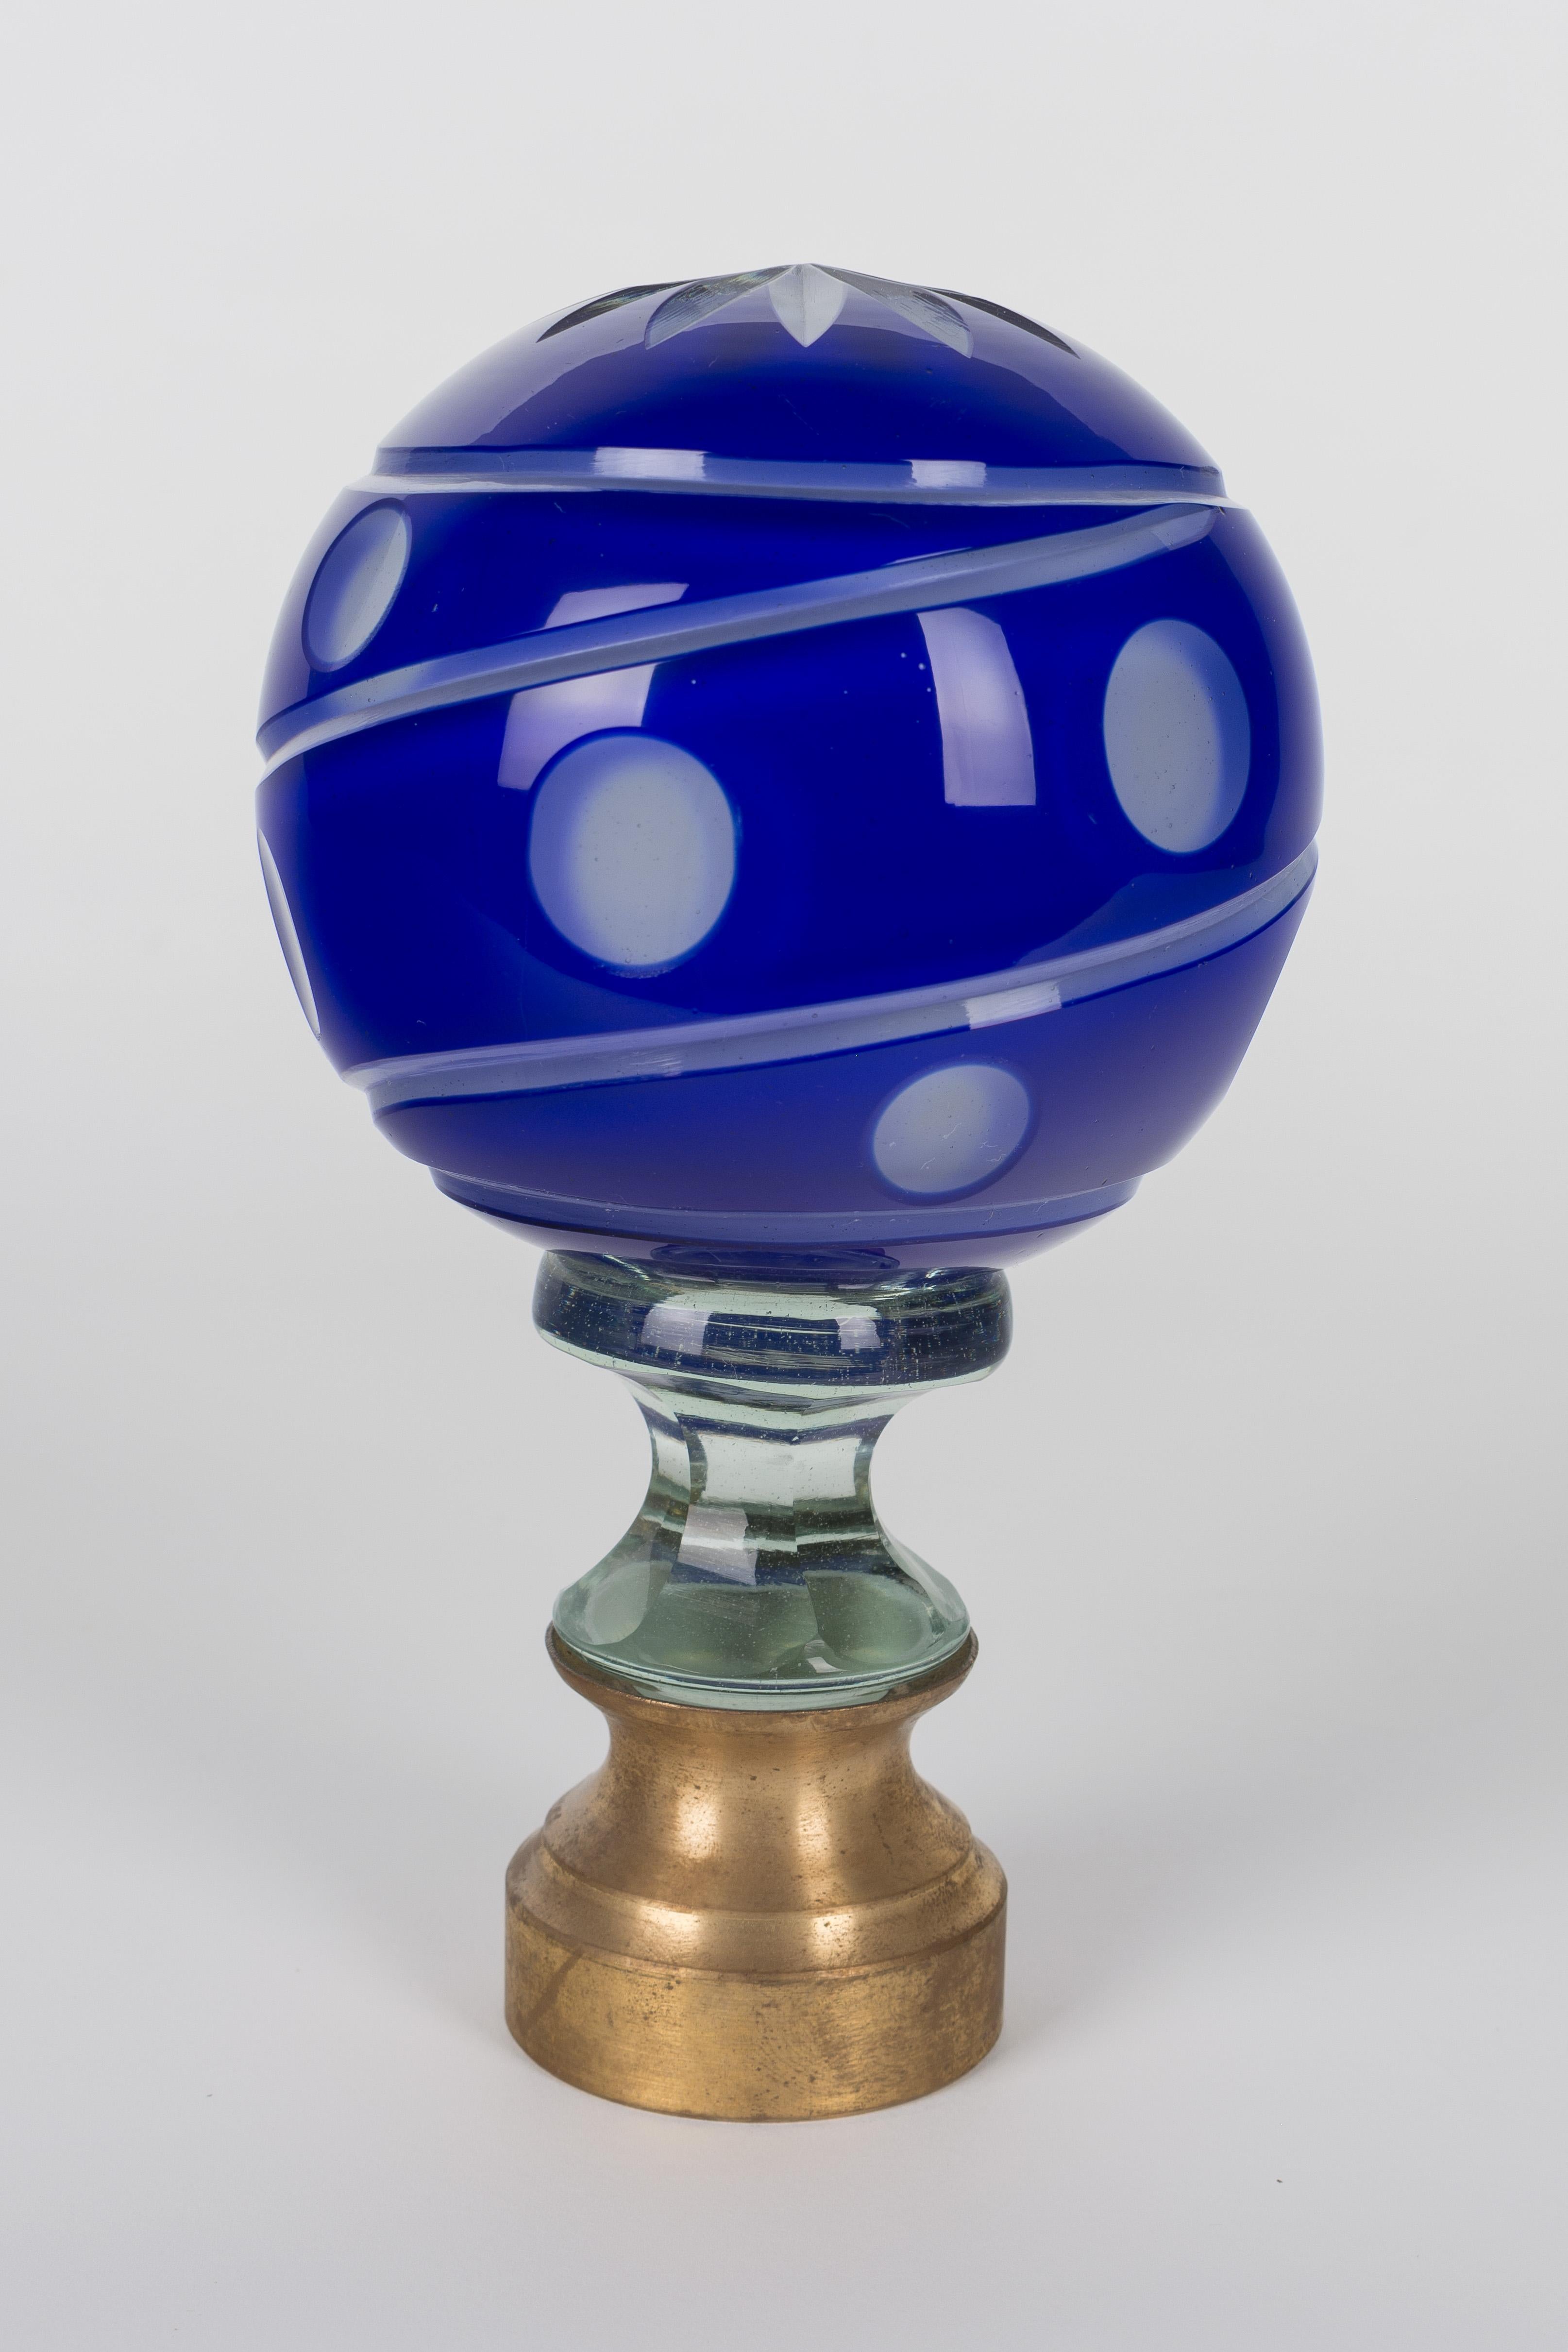 An early 20th century French glass newel post finial or boule d'escalier. These wonderful finials were used as decorative elements at the bottom of a staircase on the newel post. This one is made of two layers of cased glass with the cobalt glass